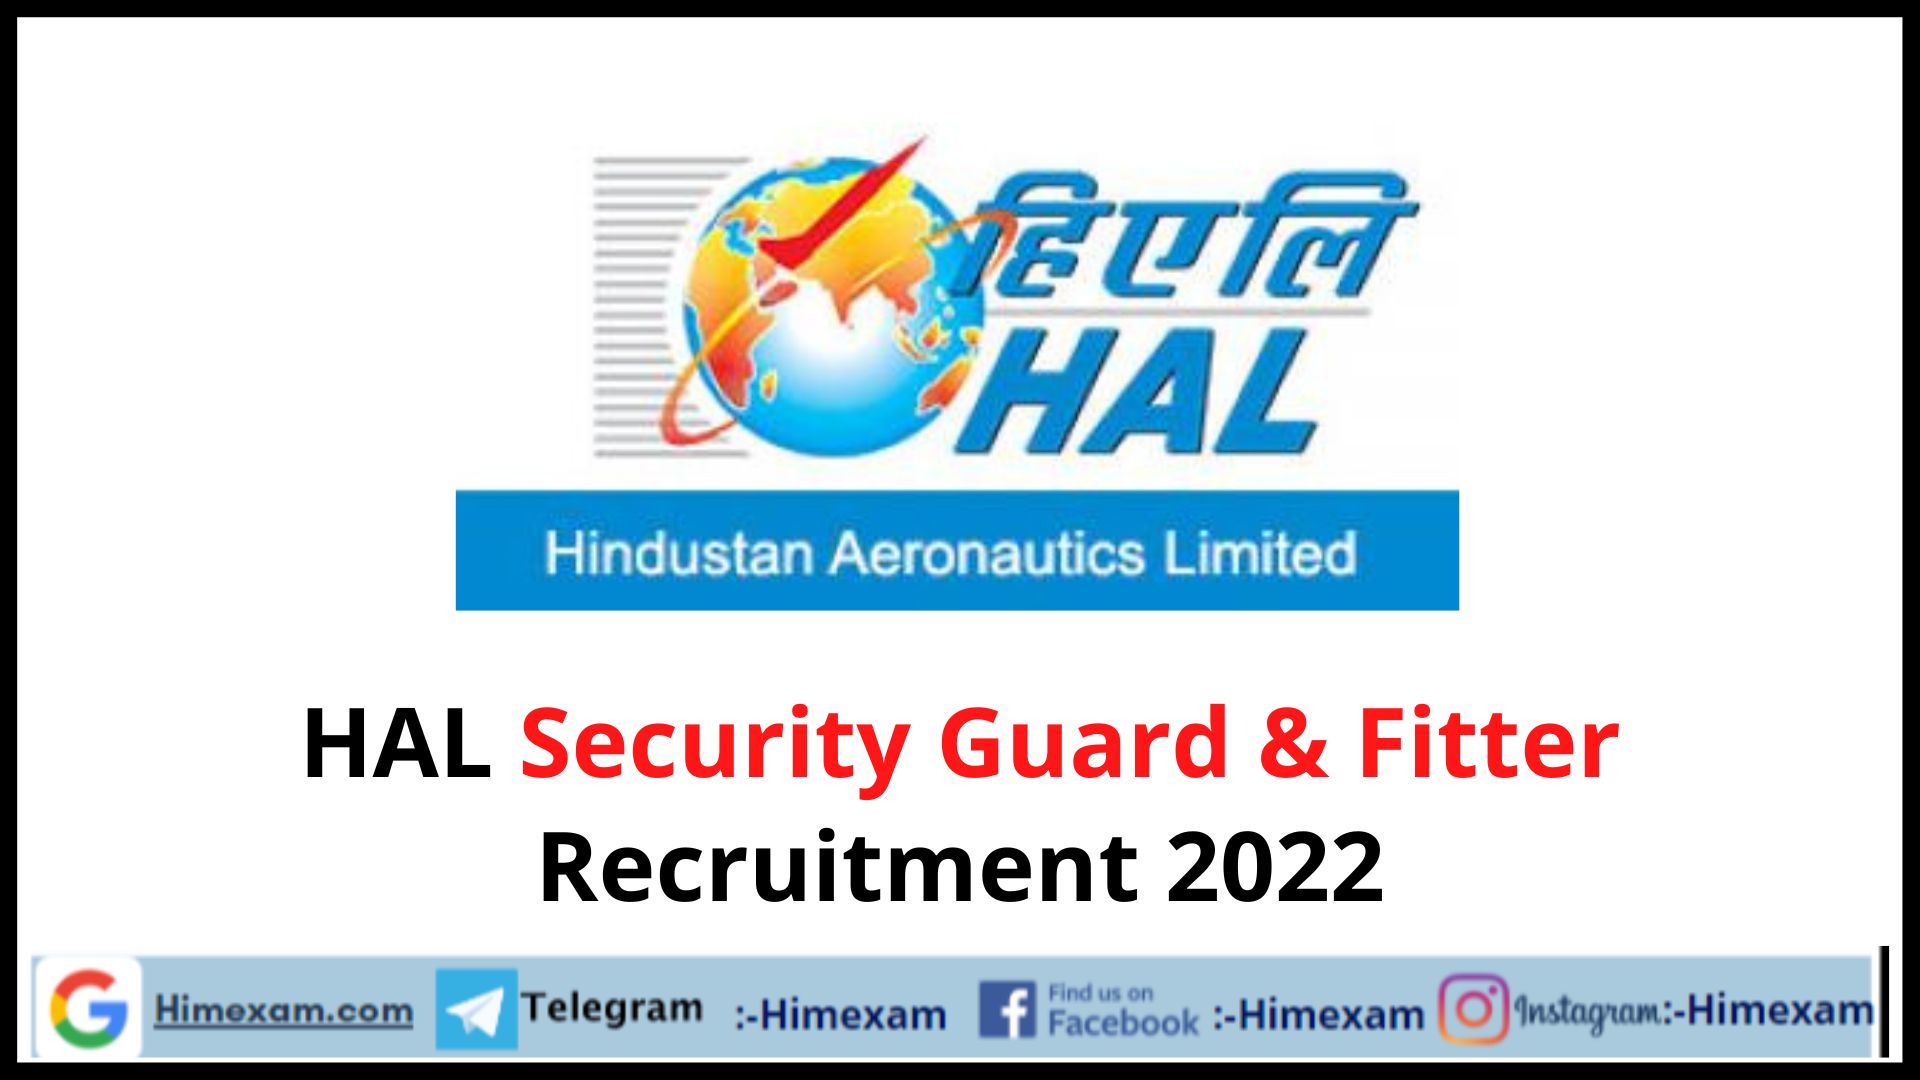 HAL Security Guard & Fitter Recruitment 2022